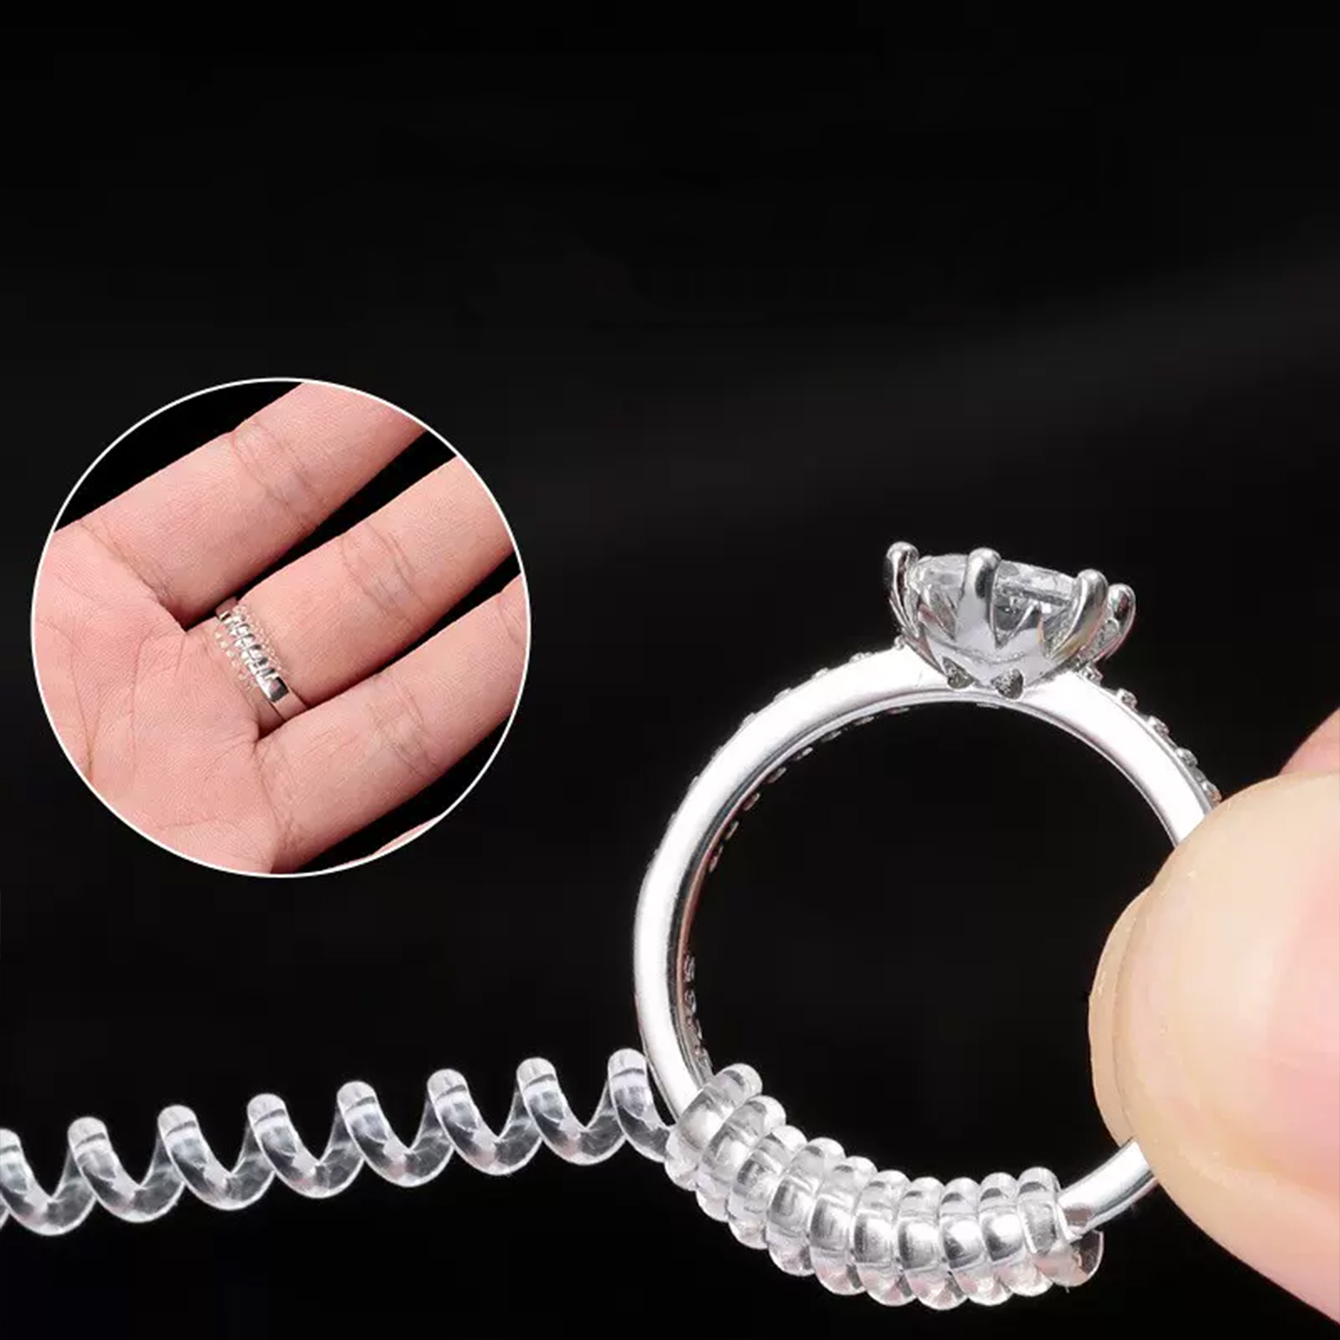  Ring Size Adjuster for Loose Rings Rings Sizers Spacers Or  Tightener Resizer Ring Smaller Adjuster Connector Ring Guards for Loose  Rings Men Wide : Arts, Crafts & Sewing